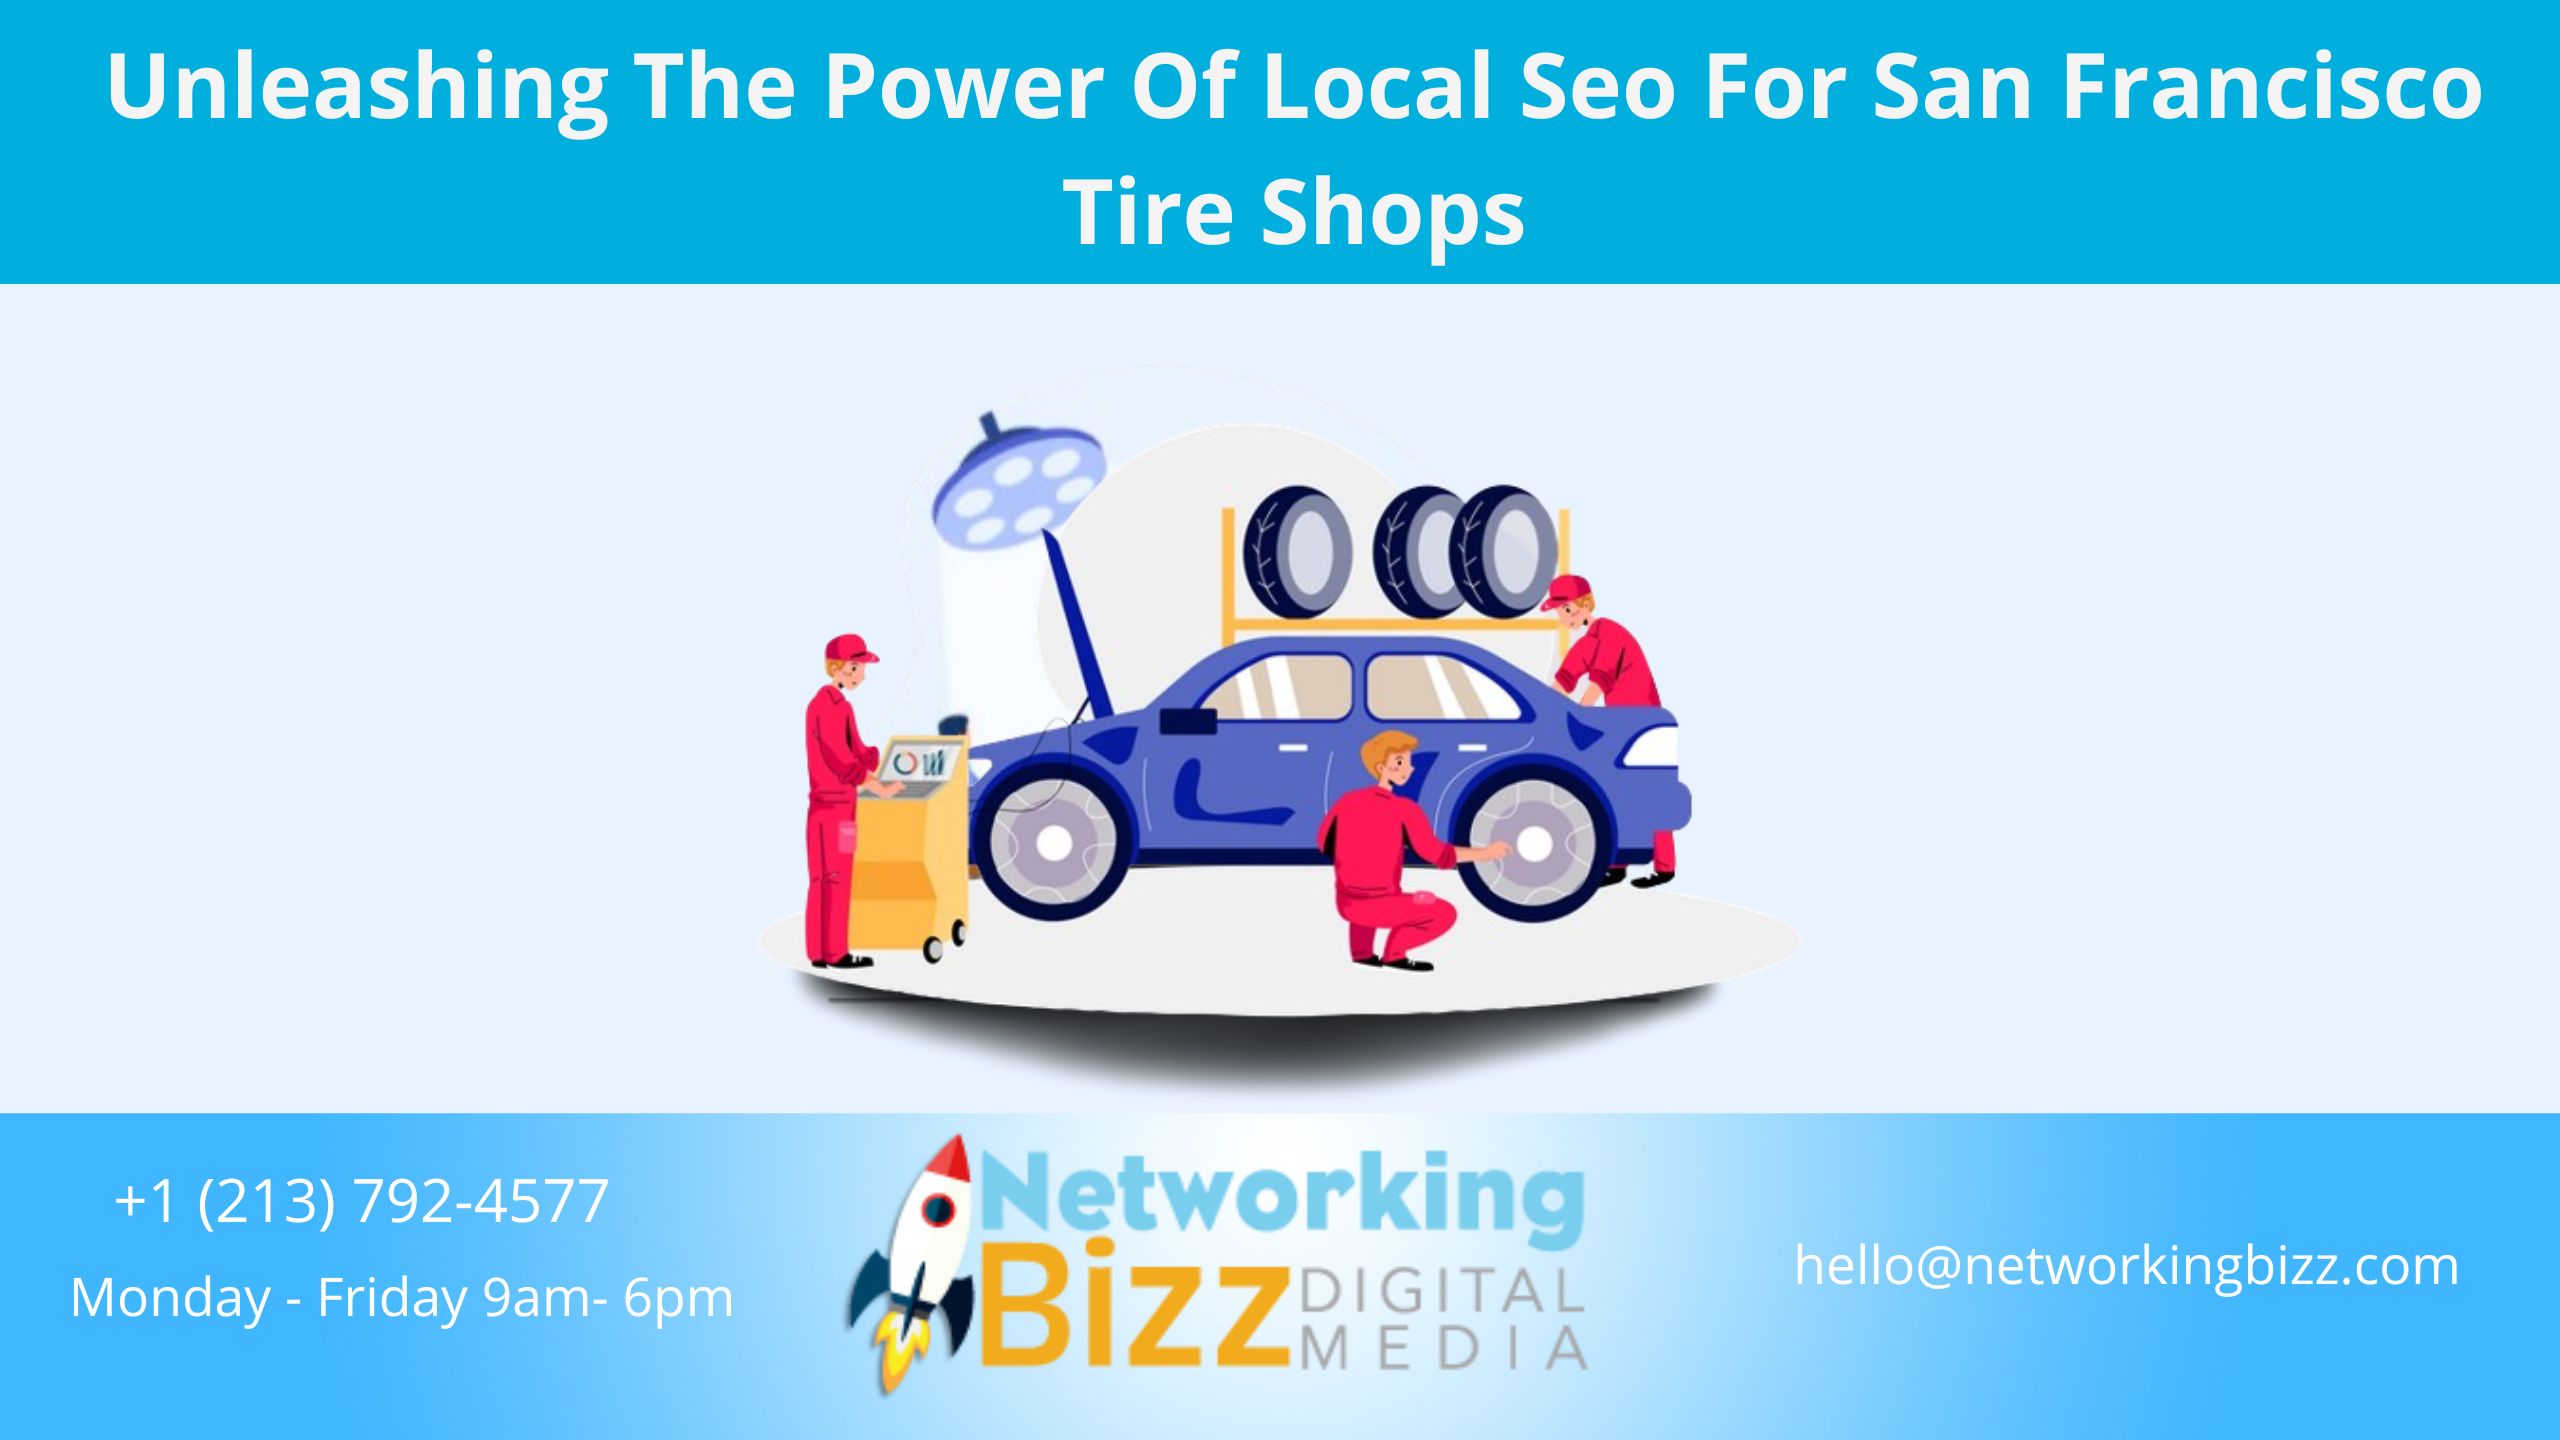 Unleashing The Power Of Local Seo For San Francisco Tire Shops